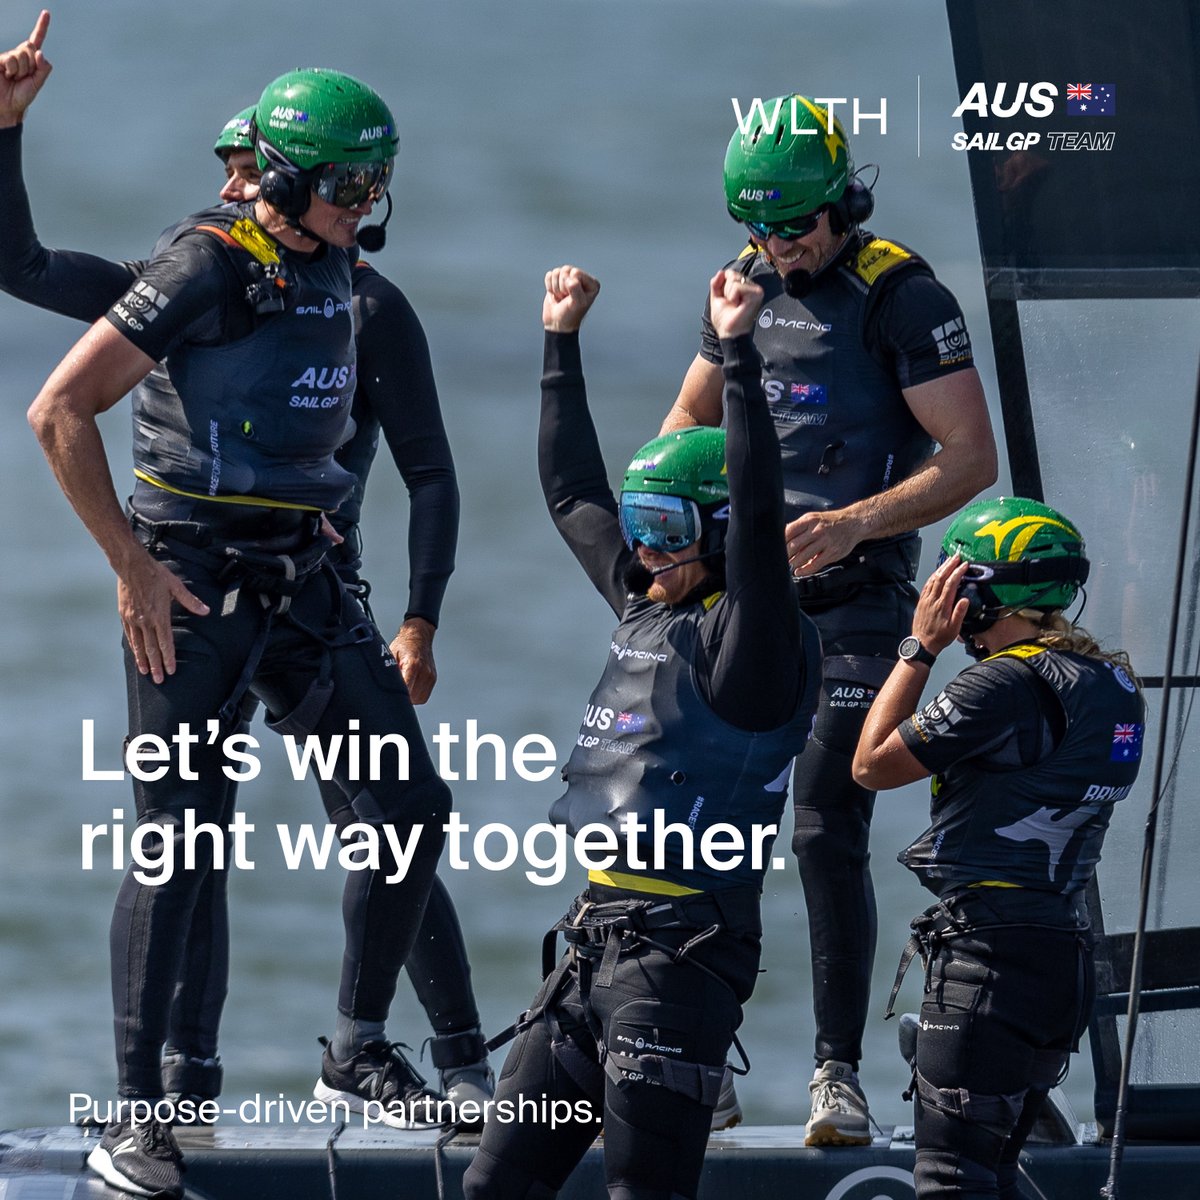 In a ground-breaking approach to partnerships, WLTH will reward the team's performance throughout the season with impact investment in collaboration with the Australia team’s Race For The Future partner, @parleyforoceans.

#partnerships #raceforthefuture #loansfortheoceans